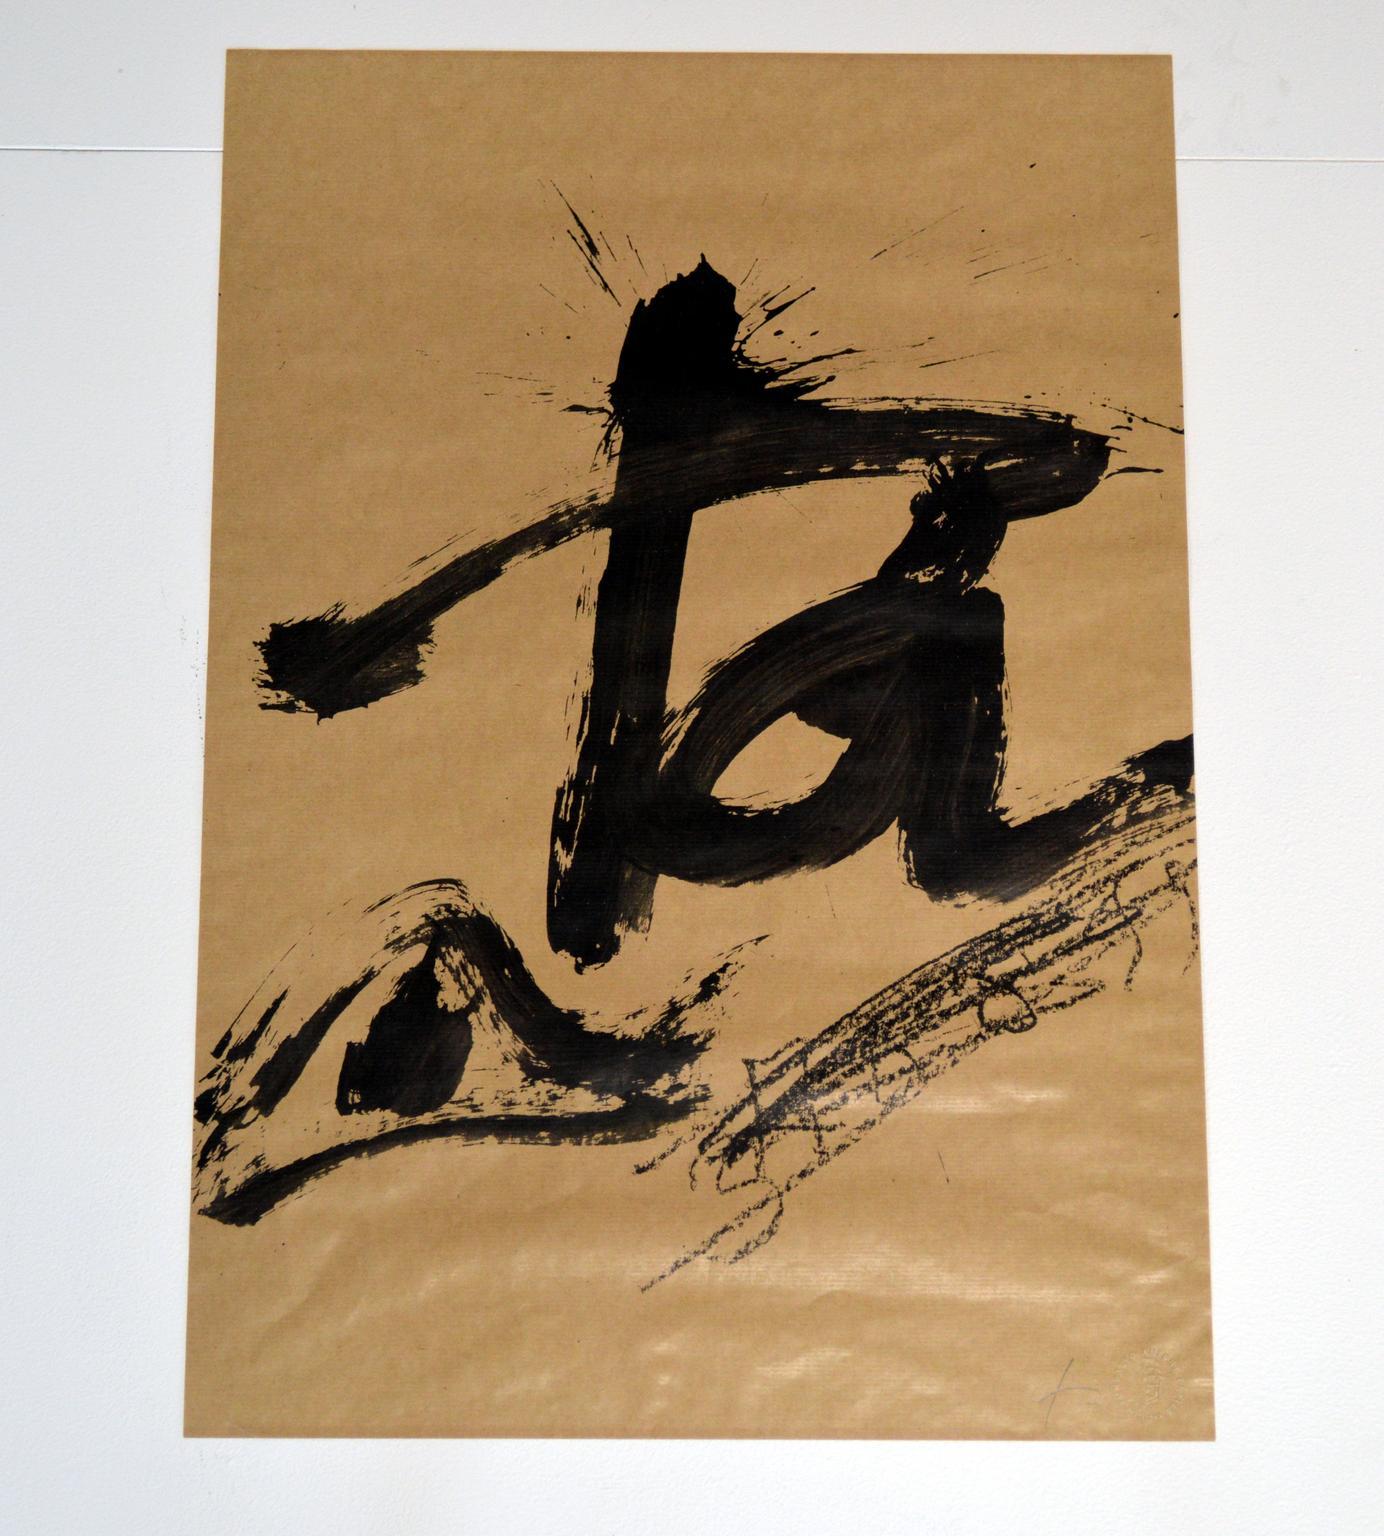 Antoni Tapies signed lithograph from the 1990 exhibition celebrating the opening of the Tàpies Foundation in Barcelona. An image of this work was used as the cover for the exhibition catalogue. Lithograph on slightly shiny brown paper with woven